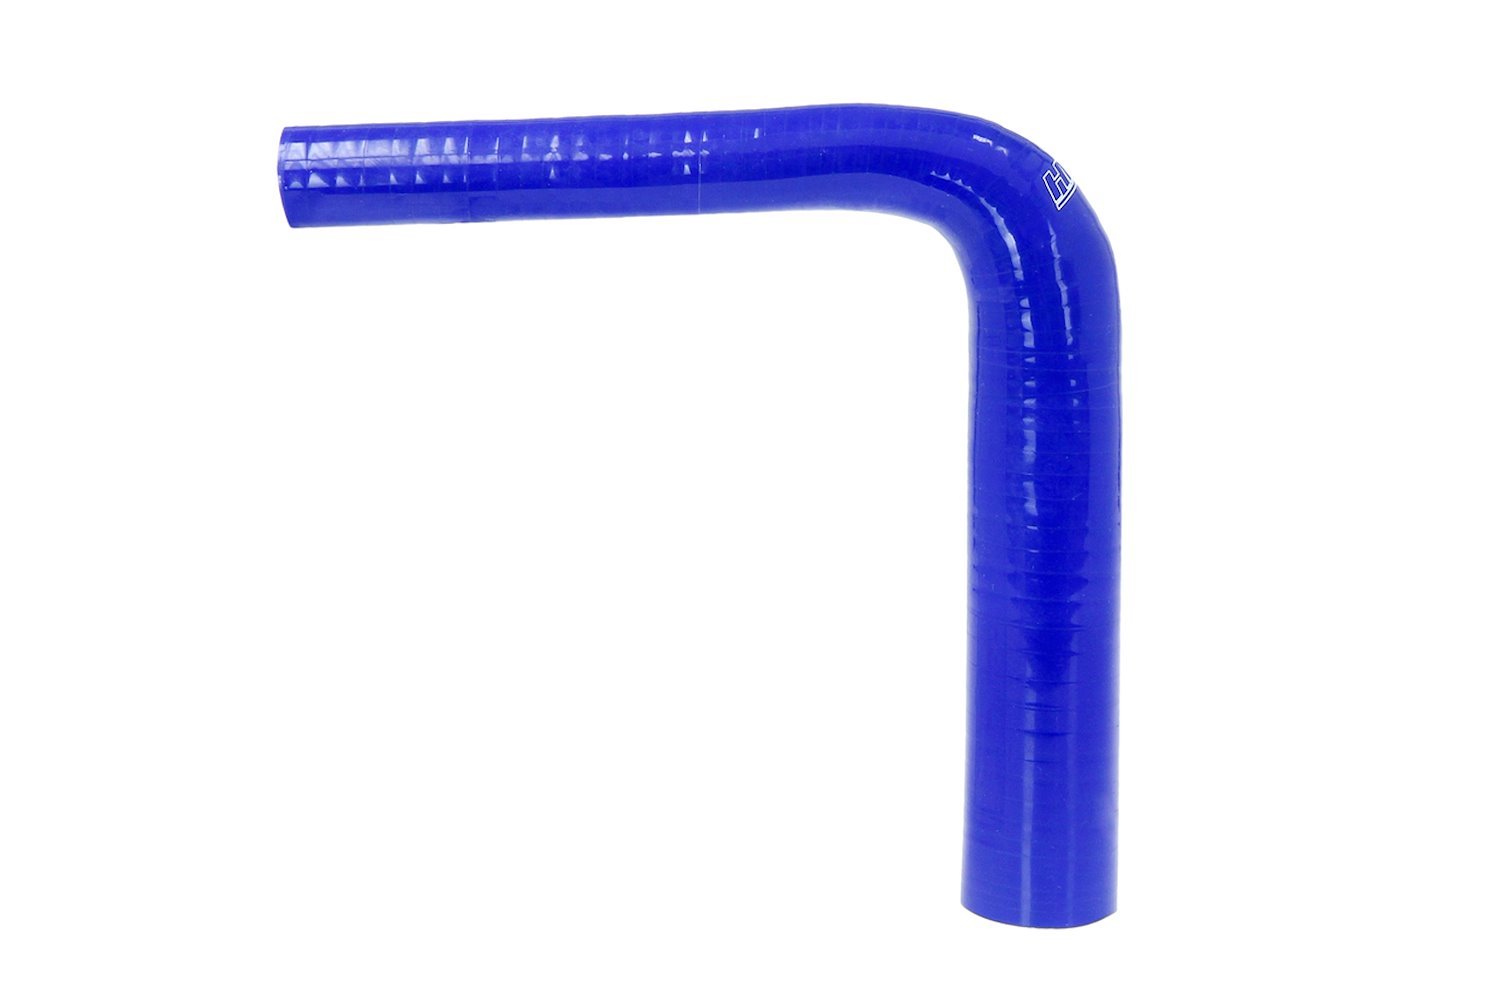 HTSER90-150-187-BLUE Silicone 90-Degree Elbow Hose, High-Temp 4-Ply Reinforced, 1-1/2 in. - 1-7/8 in. ID, Blue